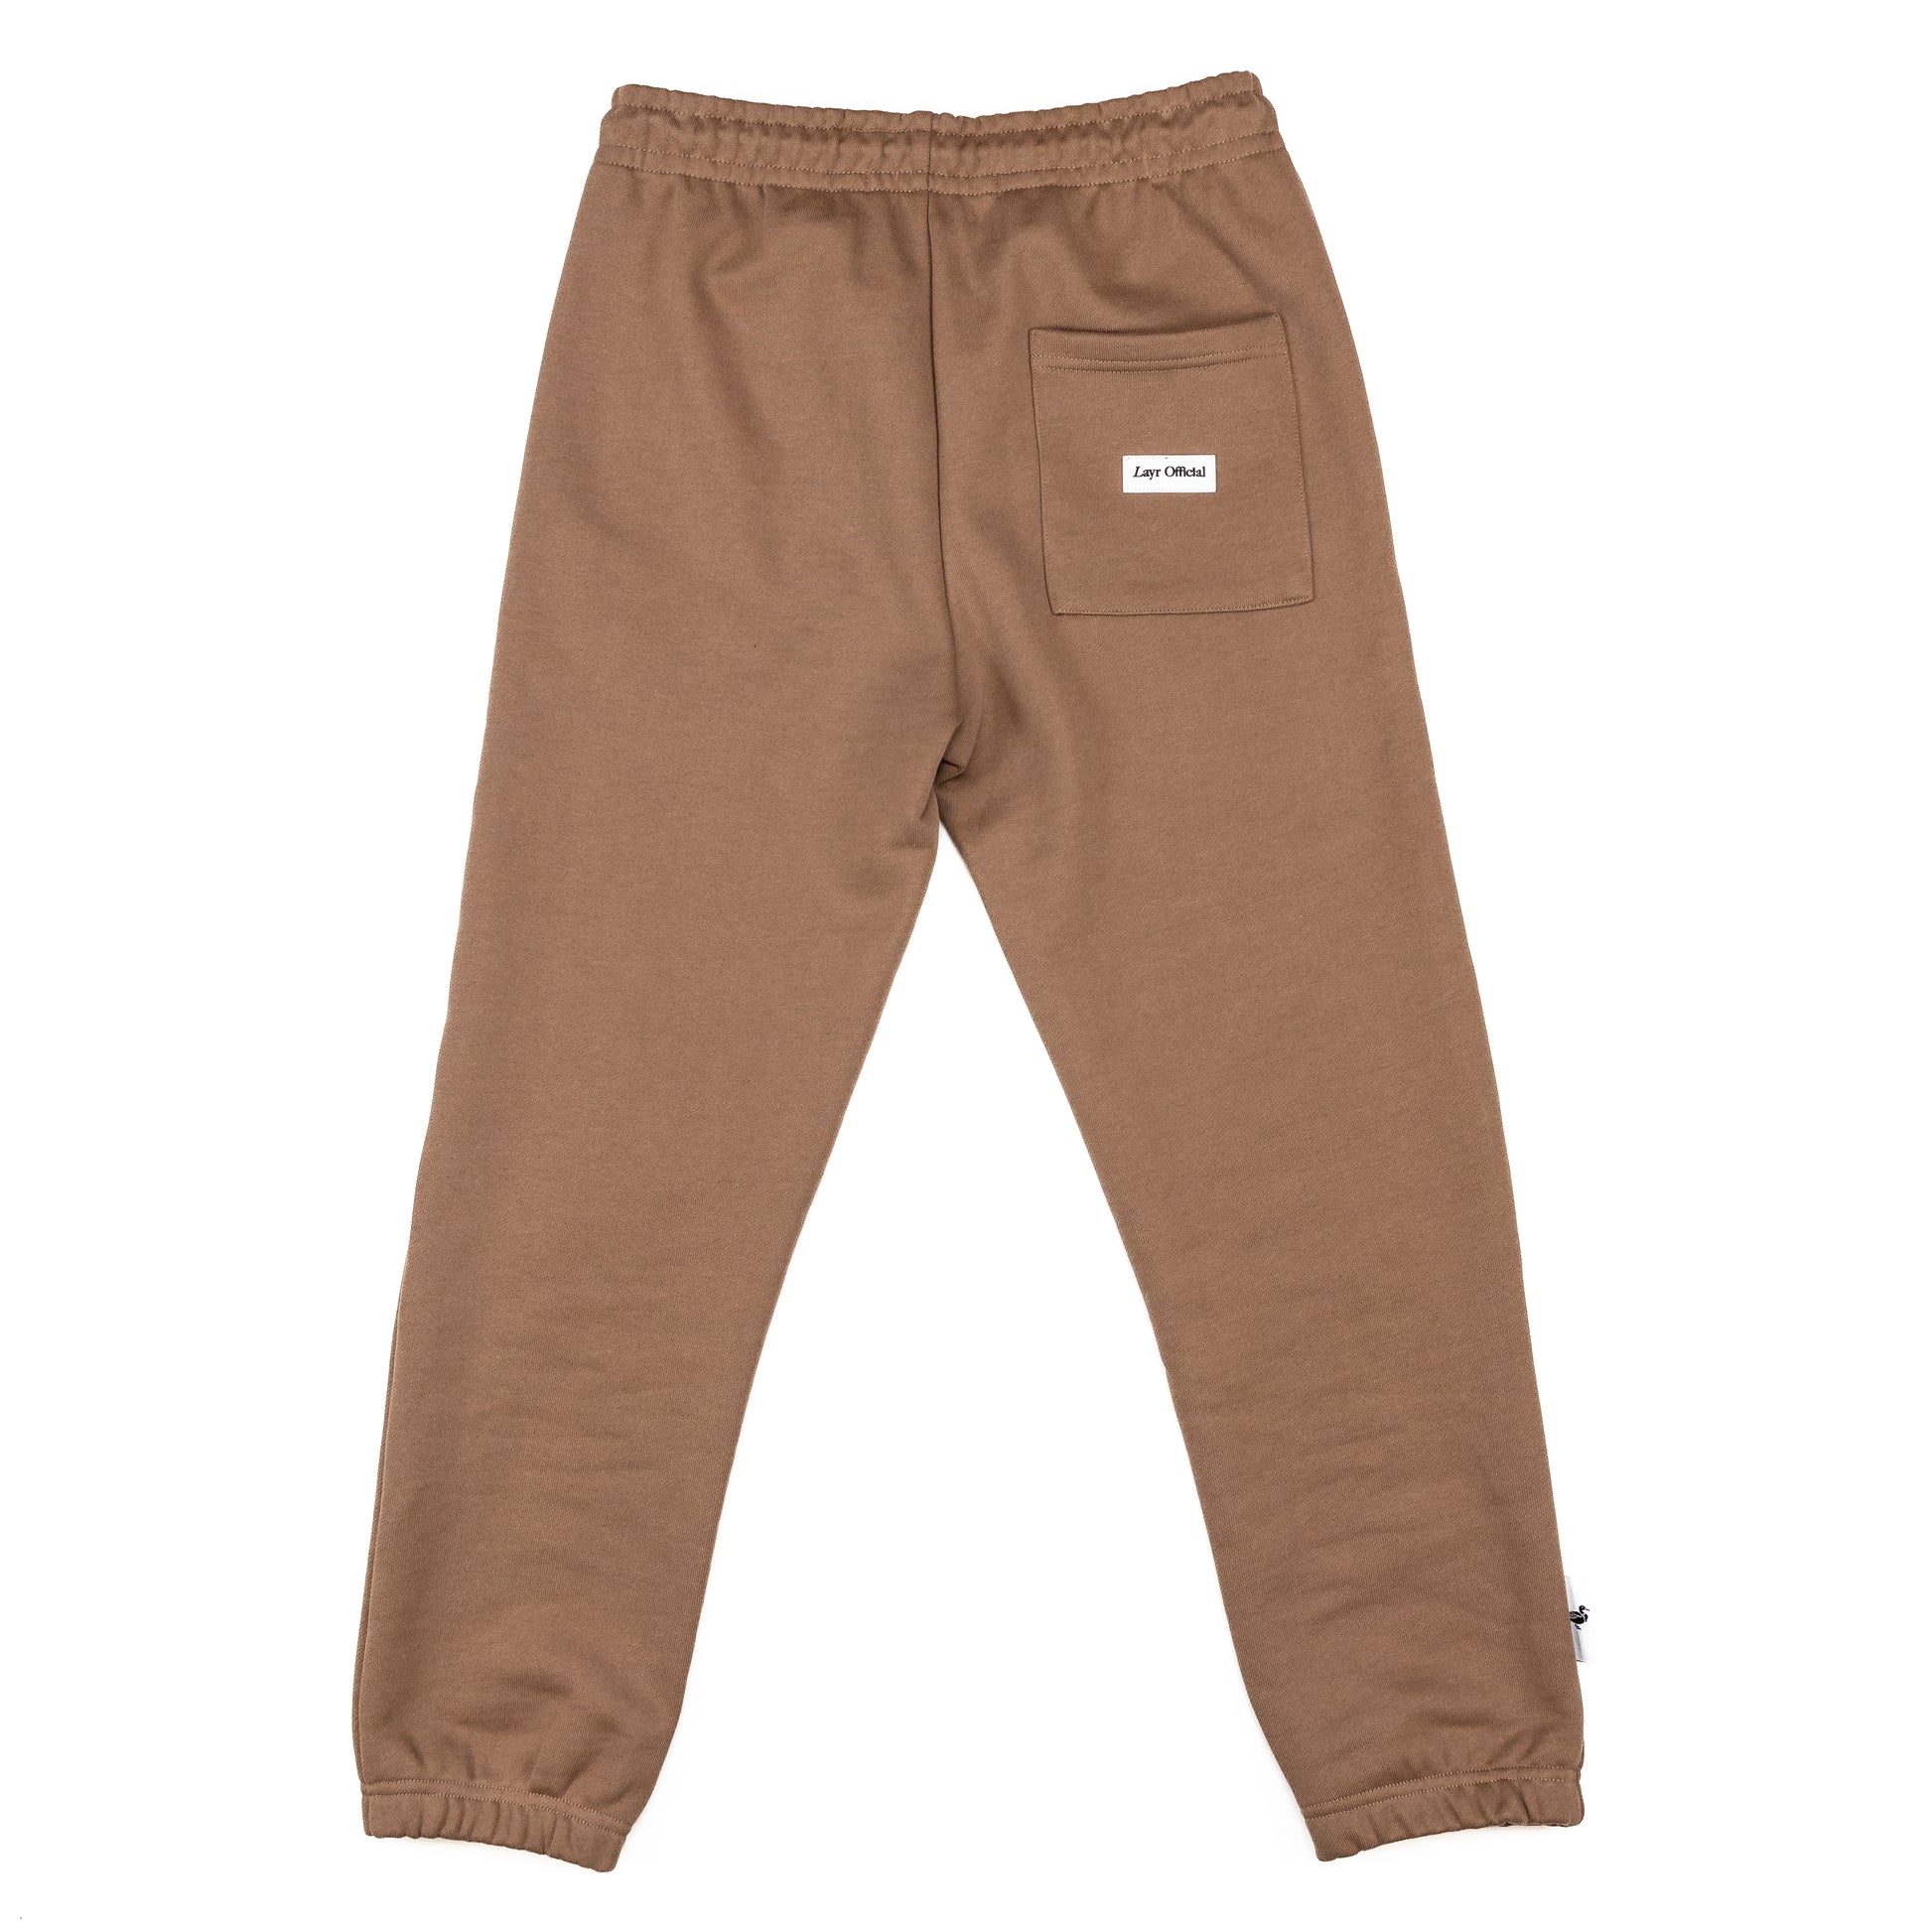 Brown Jogger Pants, KG Lounge Collection